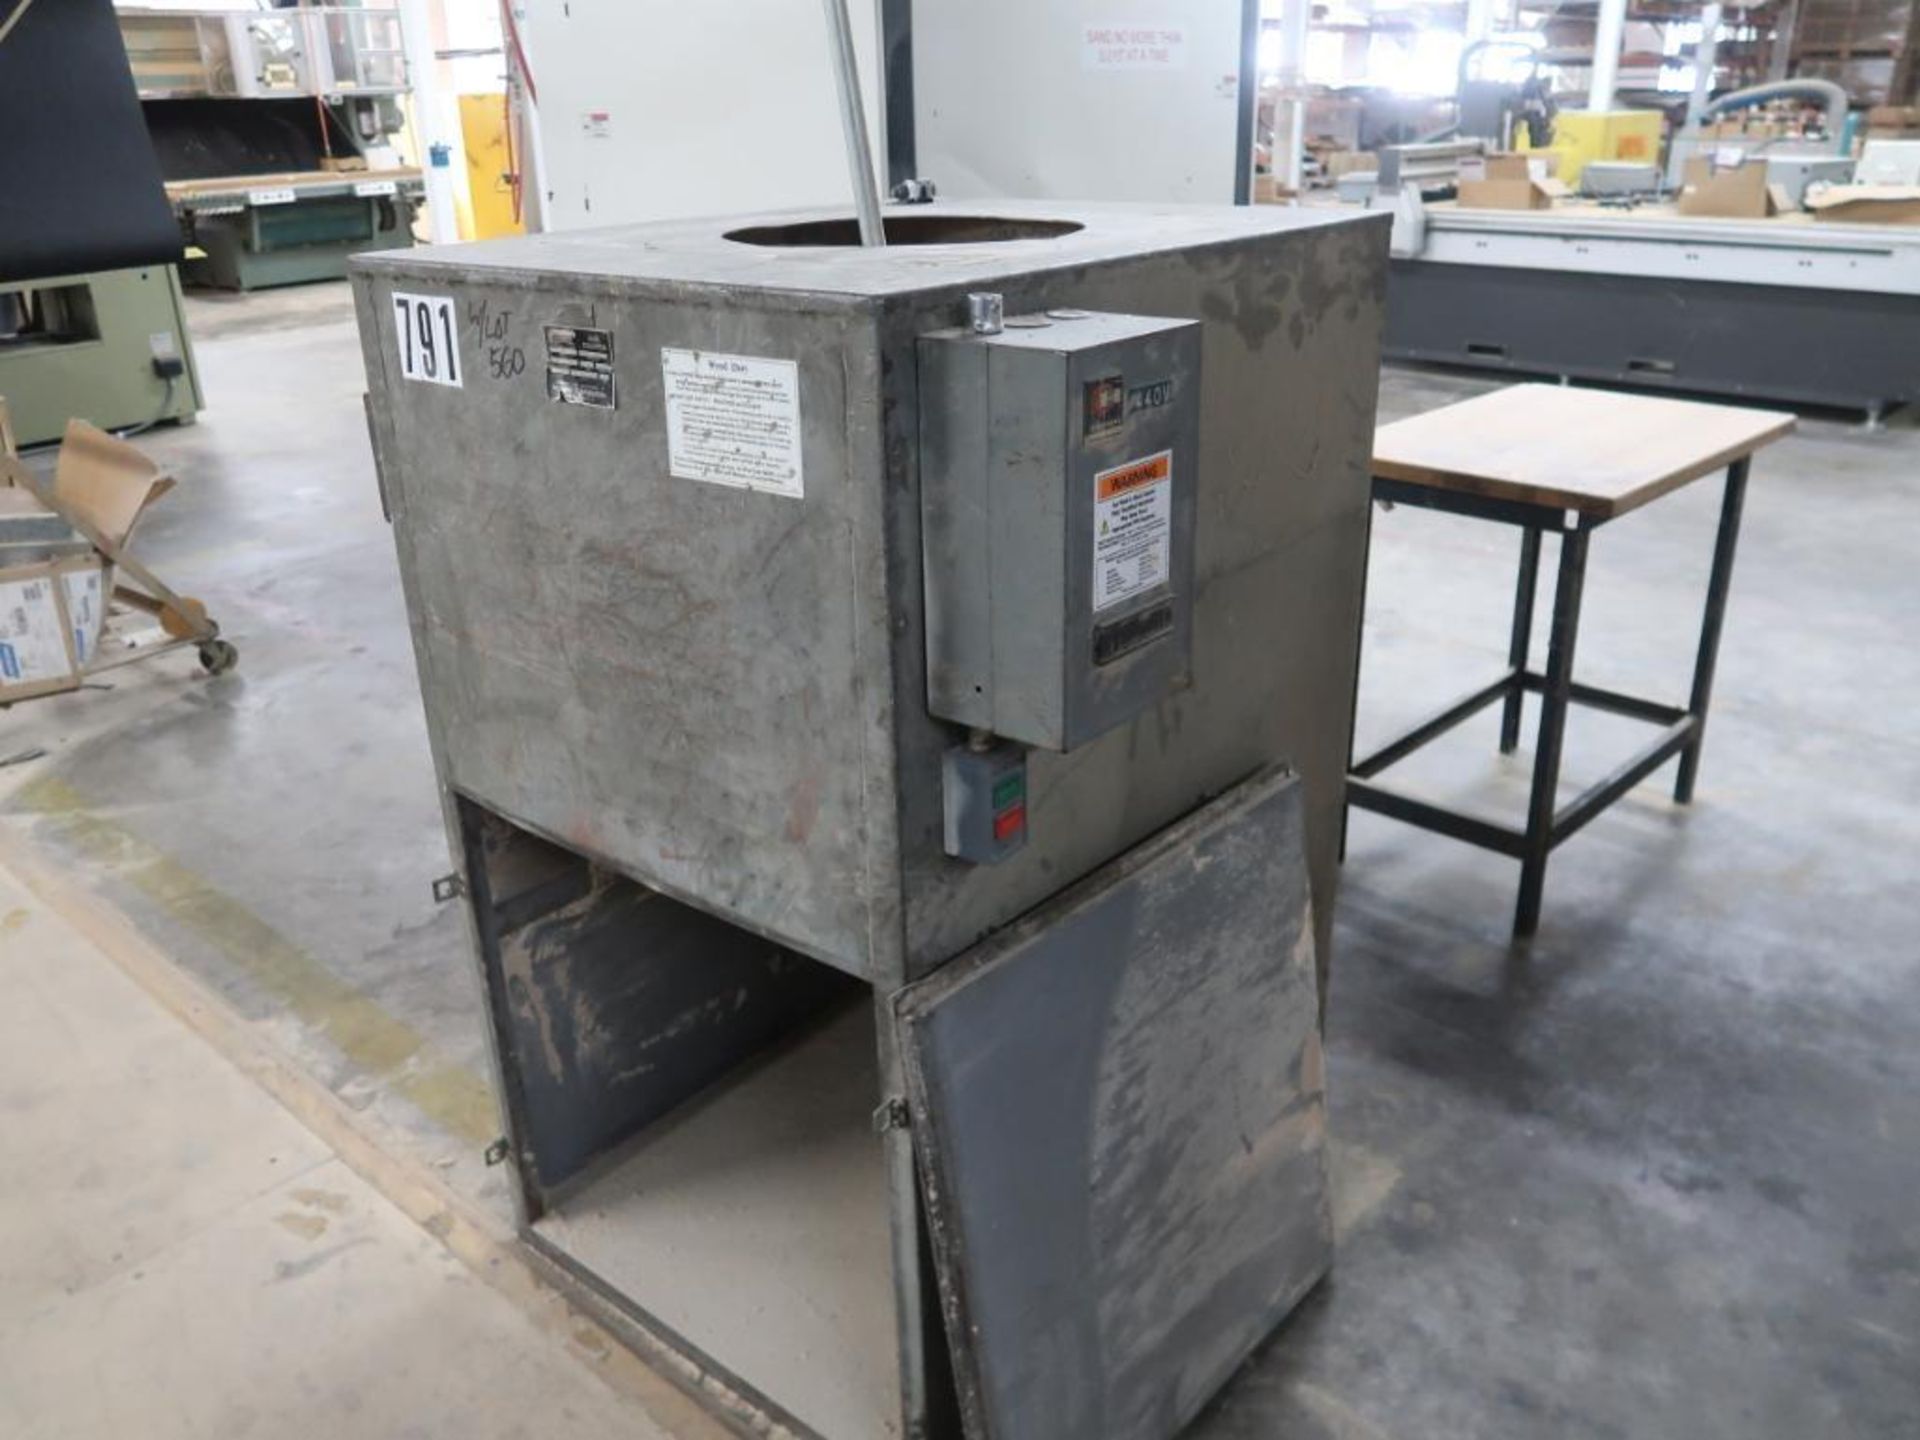 TORIT Cyclone Dust Collector Model 30-EB (disassembled)